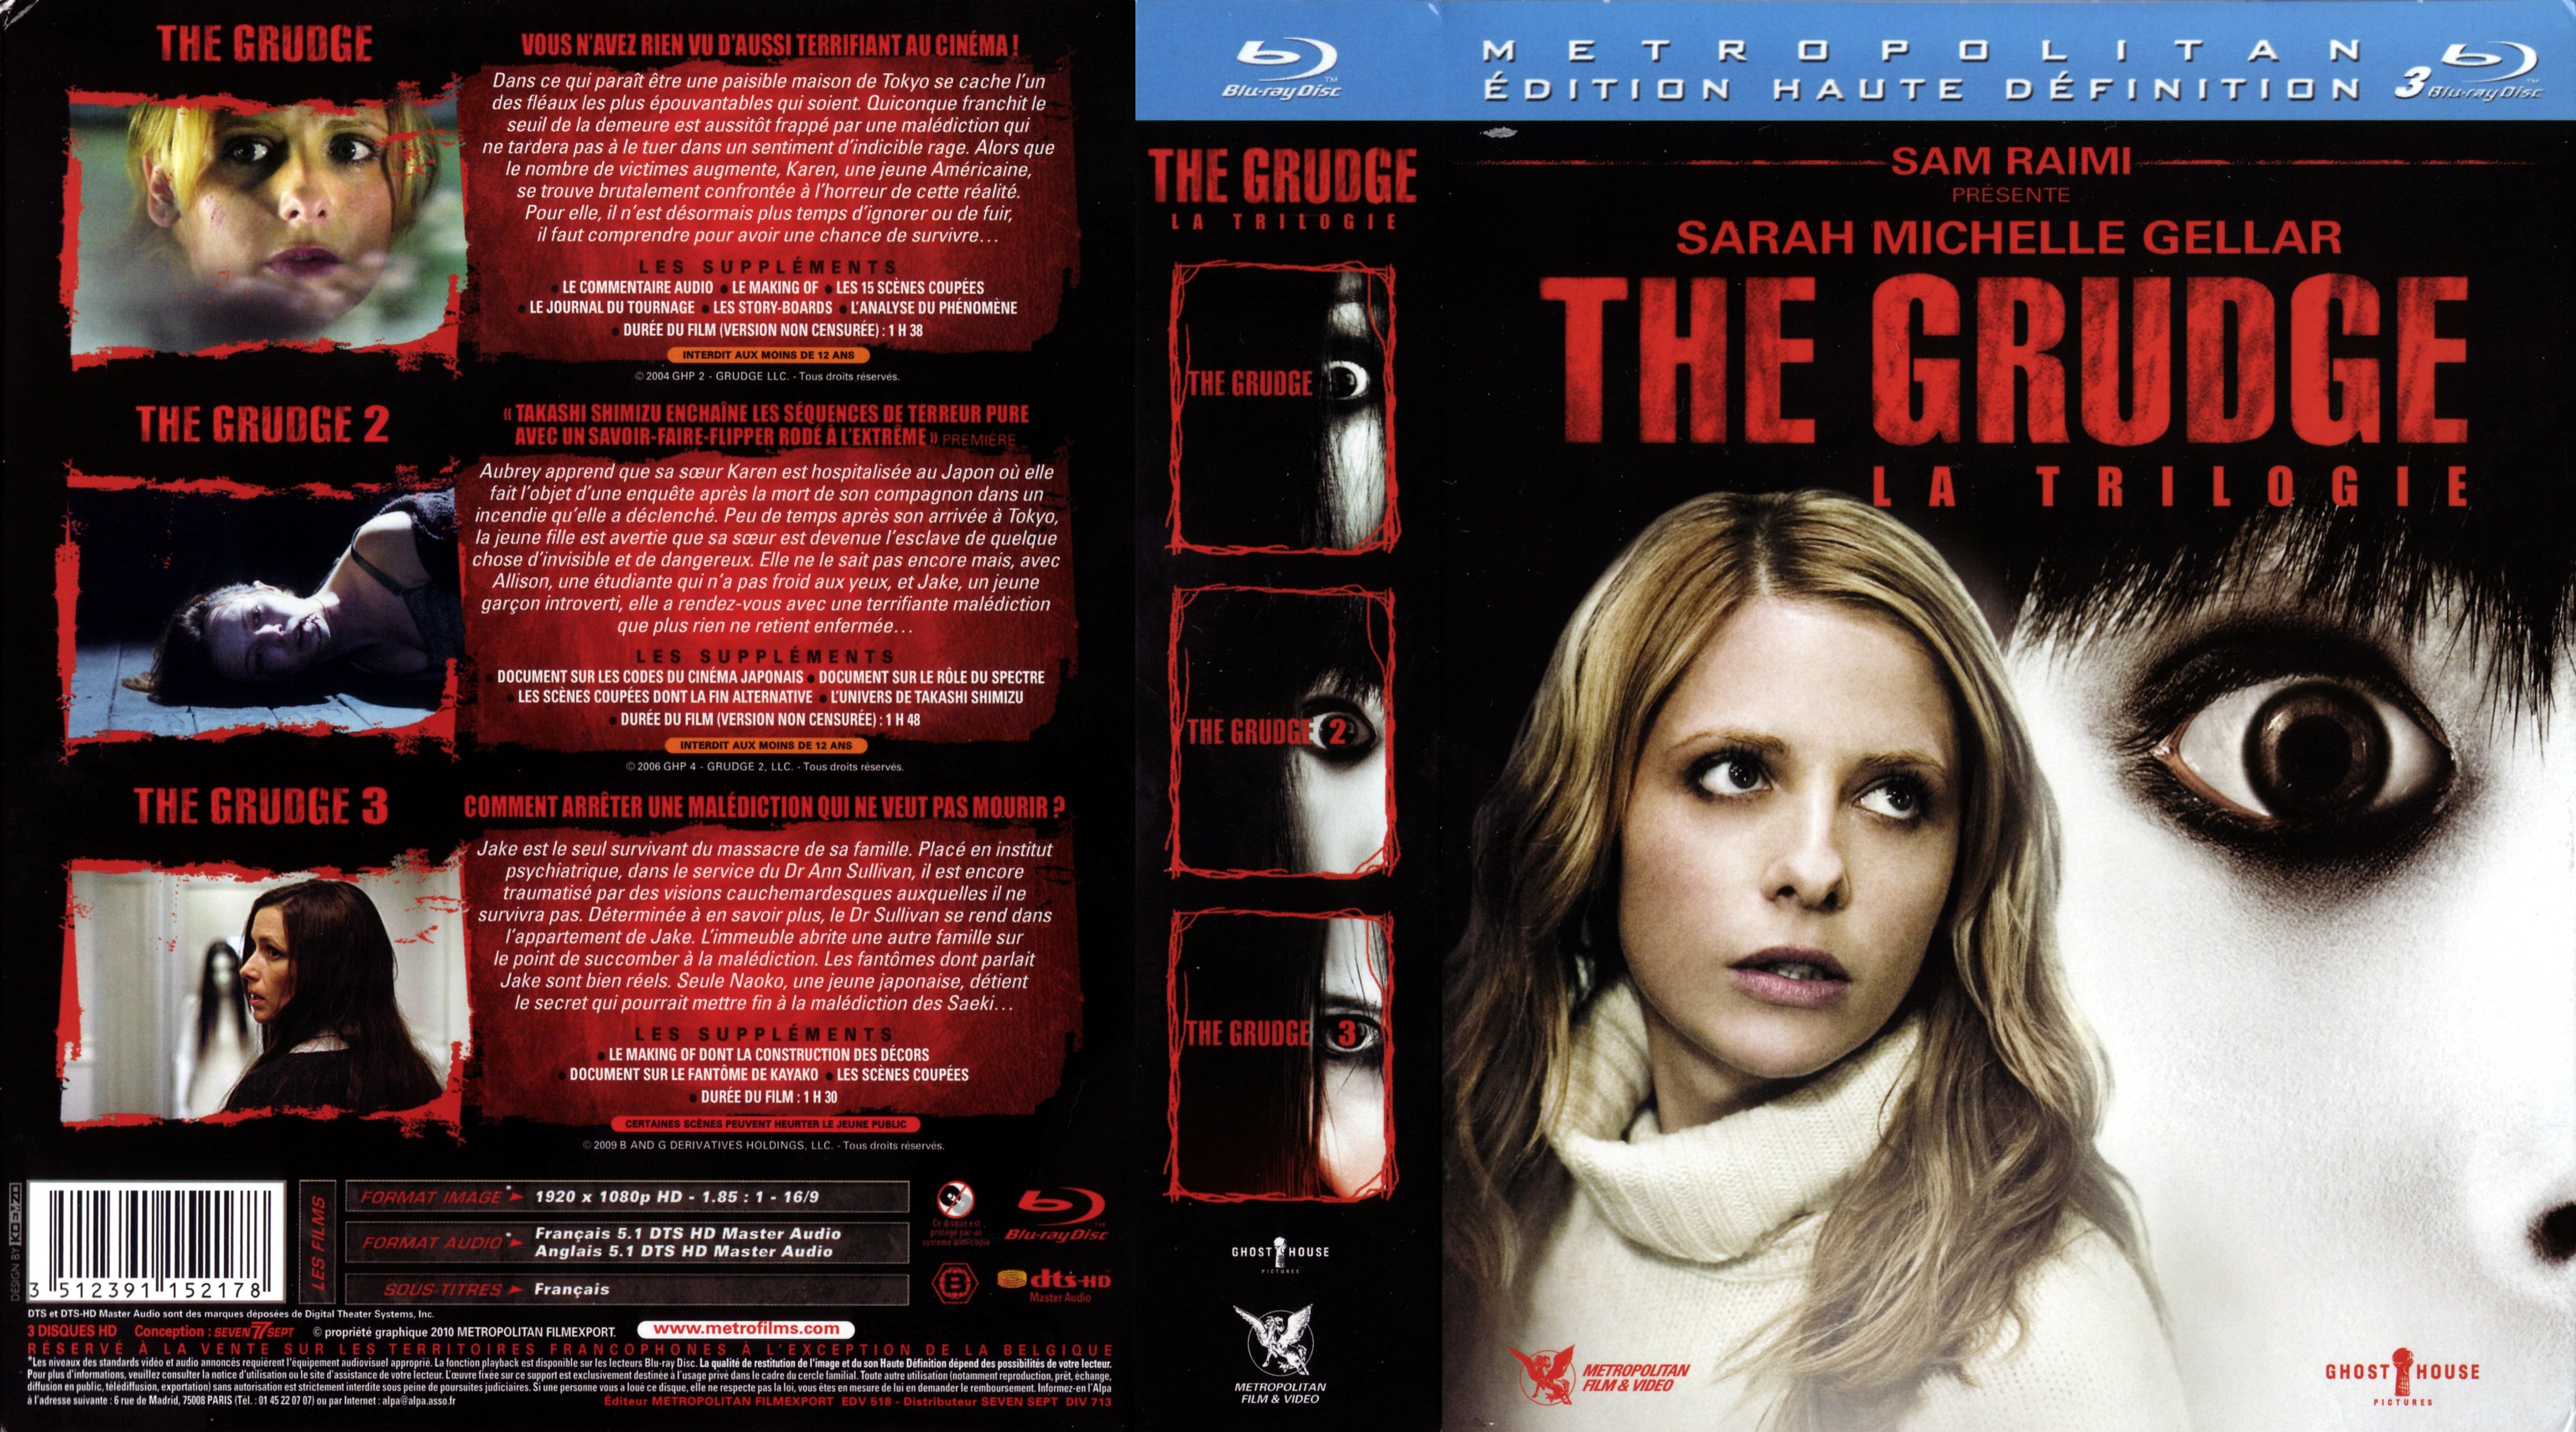 Jaquette DVD The grudge Trilogie (BLU-RAY)